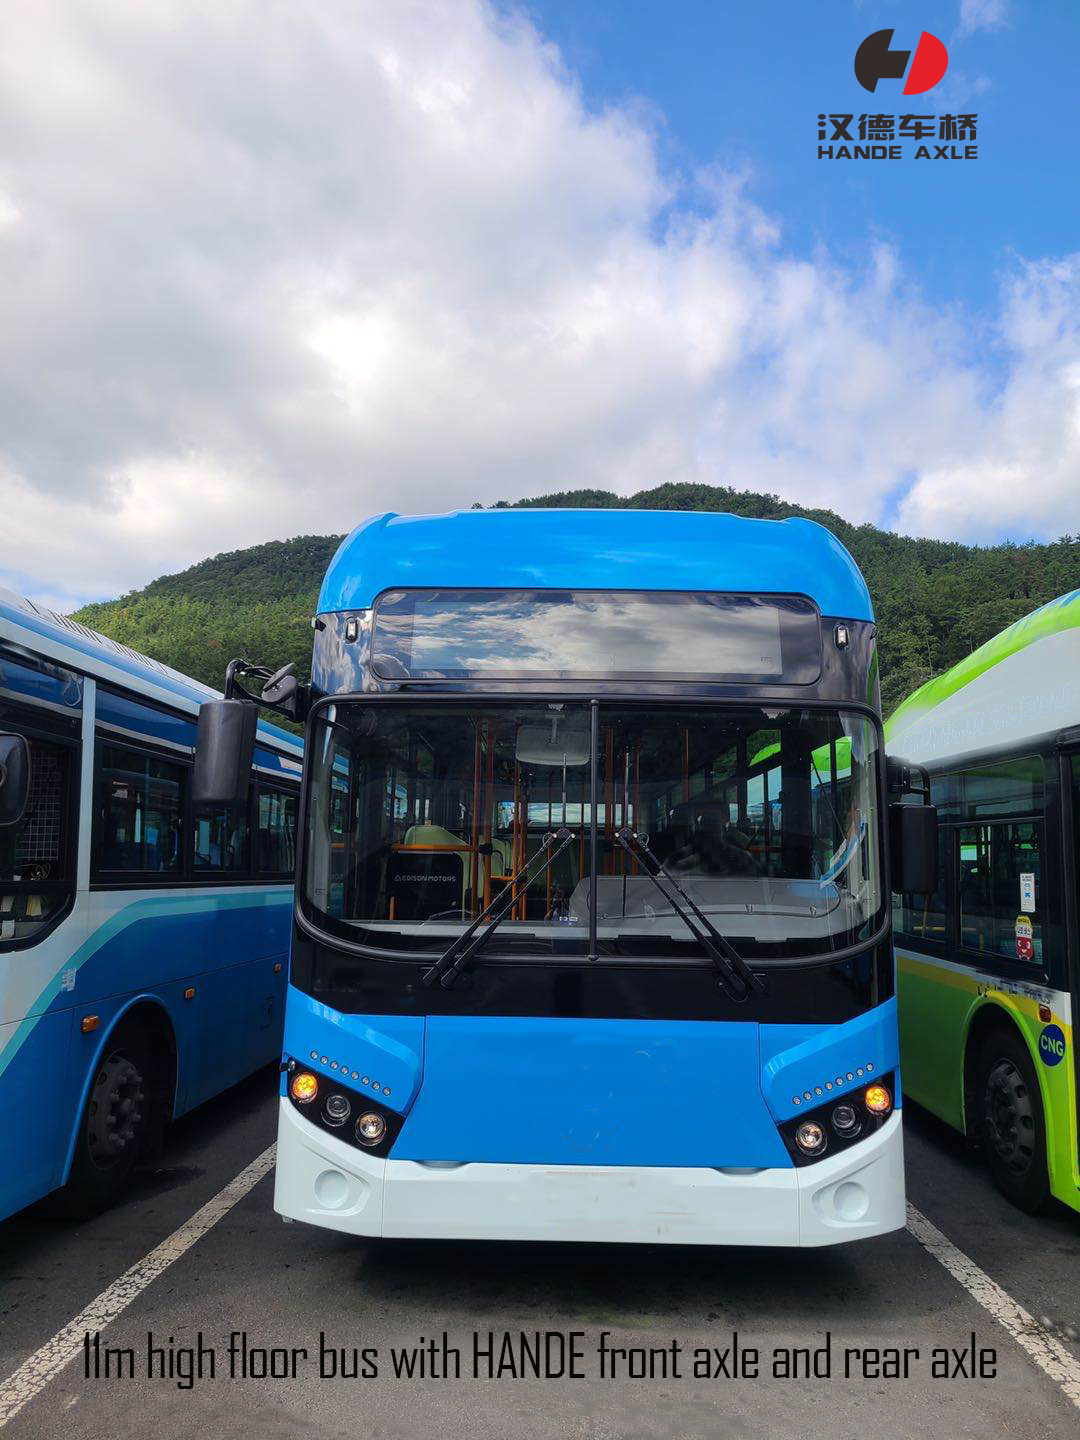 The 11m high floor bus with HANDE front axle and rear axle has been marketed in overseas market